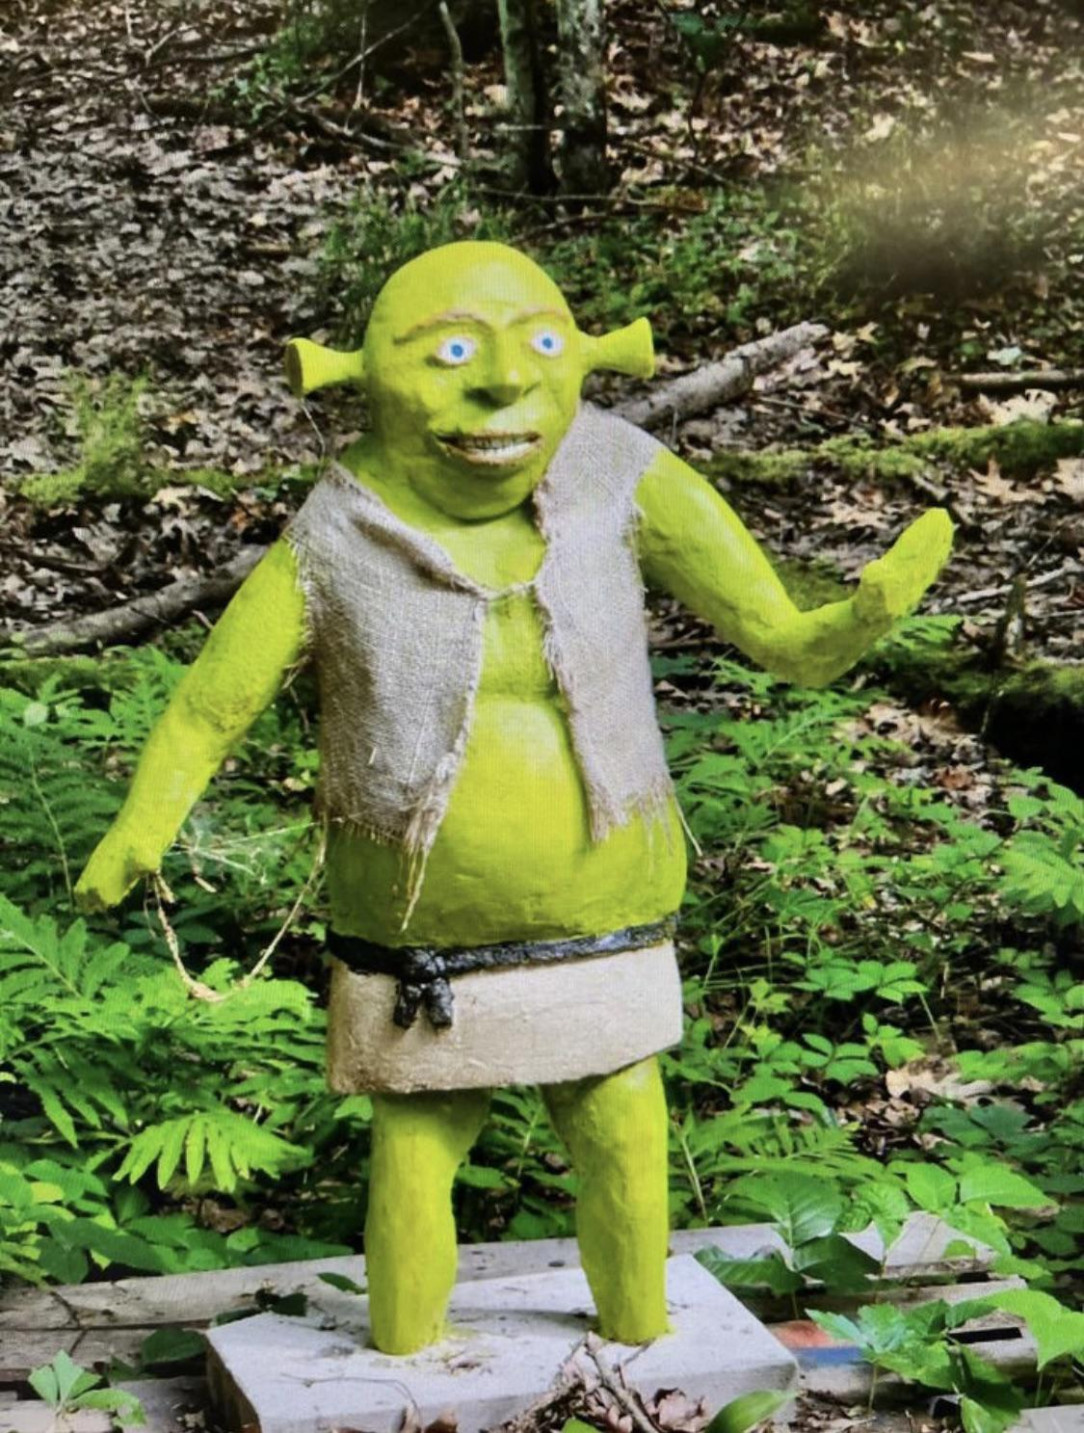 Someone stole this 200 pound Shrek statue from a house near me